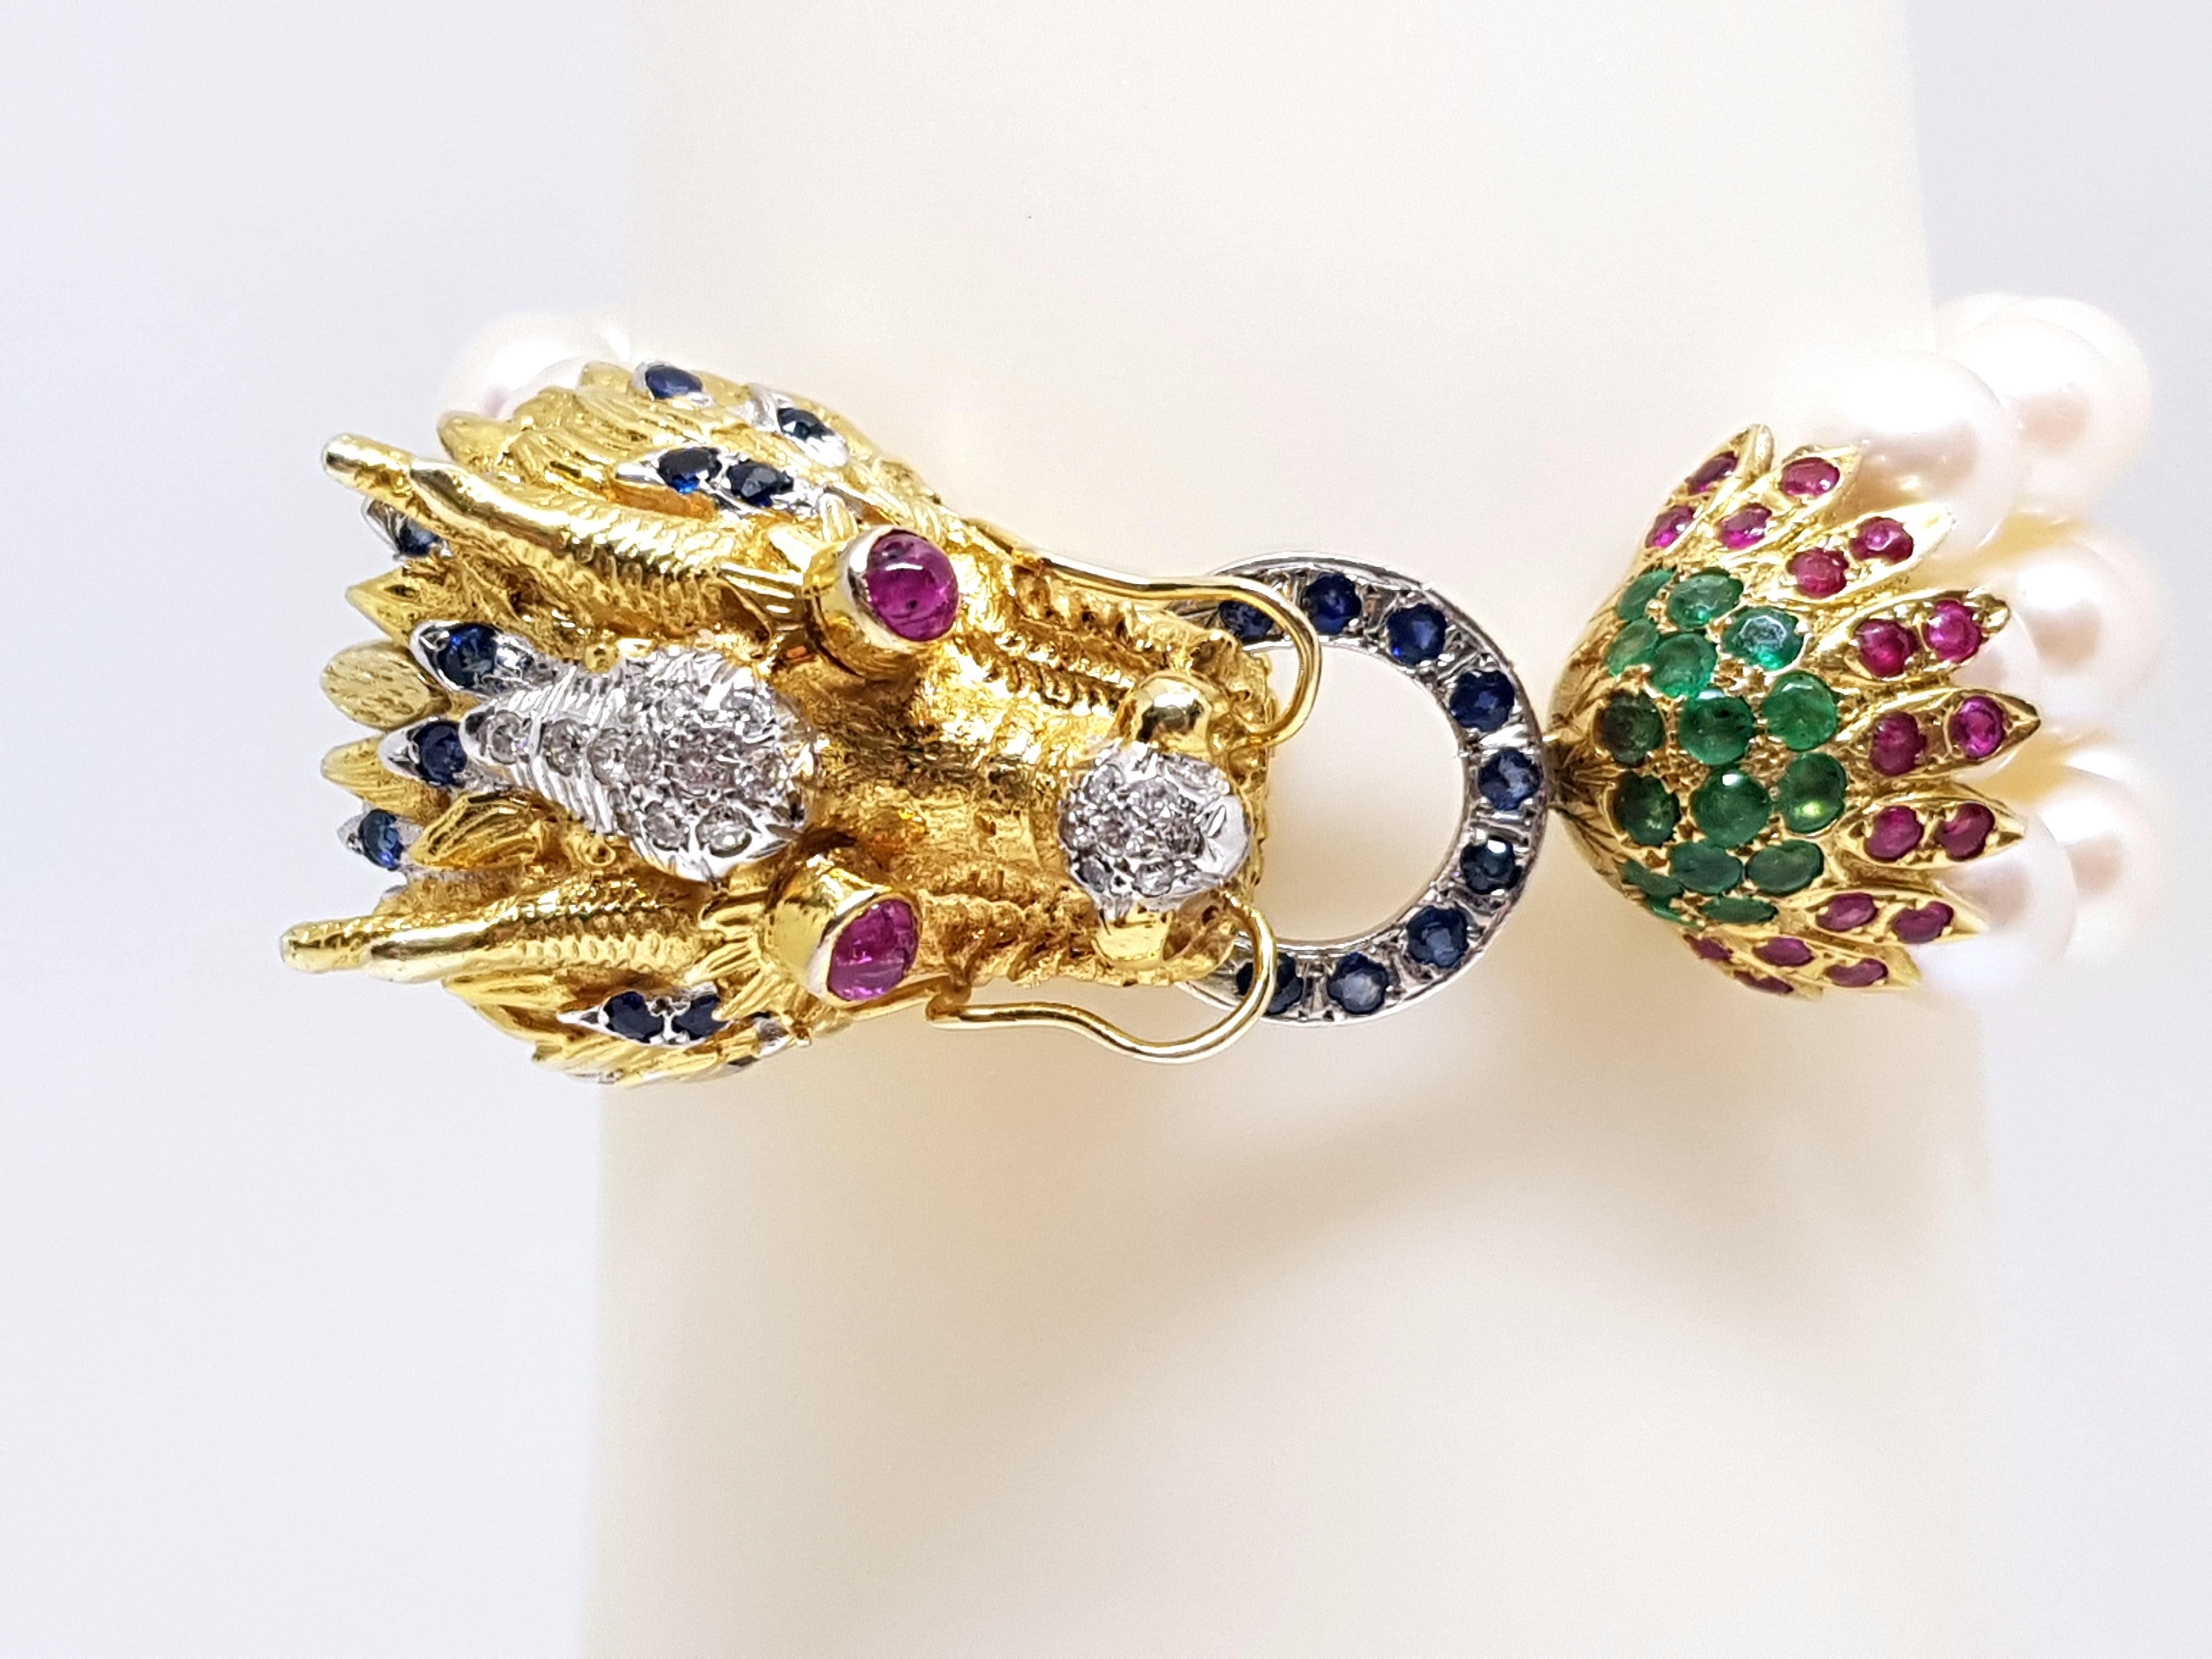 Hand Made Piece
Gold: 14K Yellow Gold. 
Weight: 75.94 gr.
Diamonds: 0.38ct. G / SI1
Sapphires: 1.05ct.
Emeralds: 1.12ct.
Rubies: 1.50ct.
Pearls: Akoya White Pearls 3 Strands
Length: 19.0 cm Free Lengthening op bracelet up to 25cm
Width: 2.3 - 2.7 cm